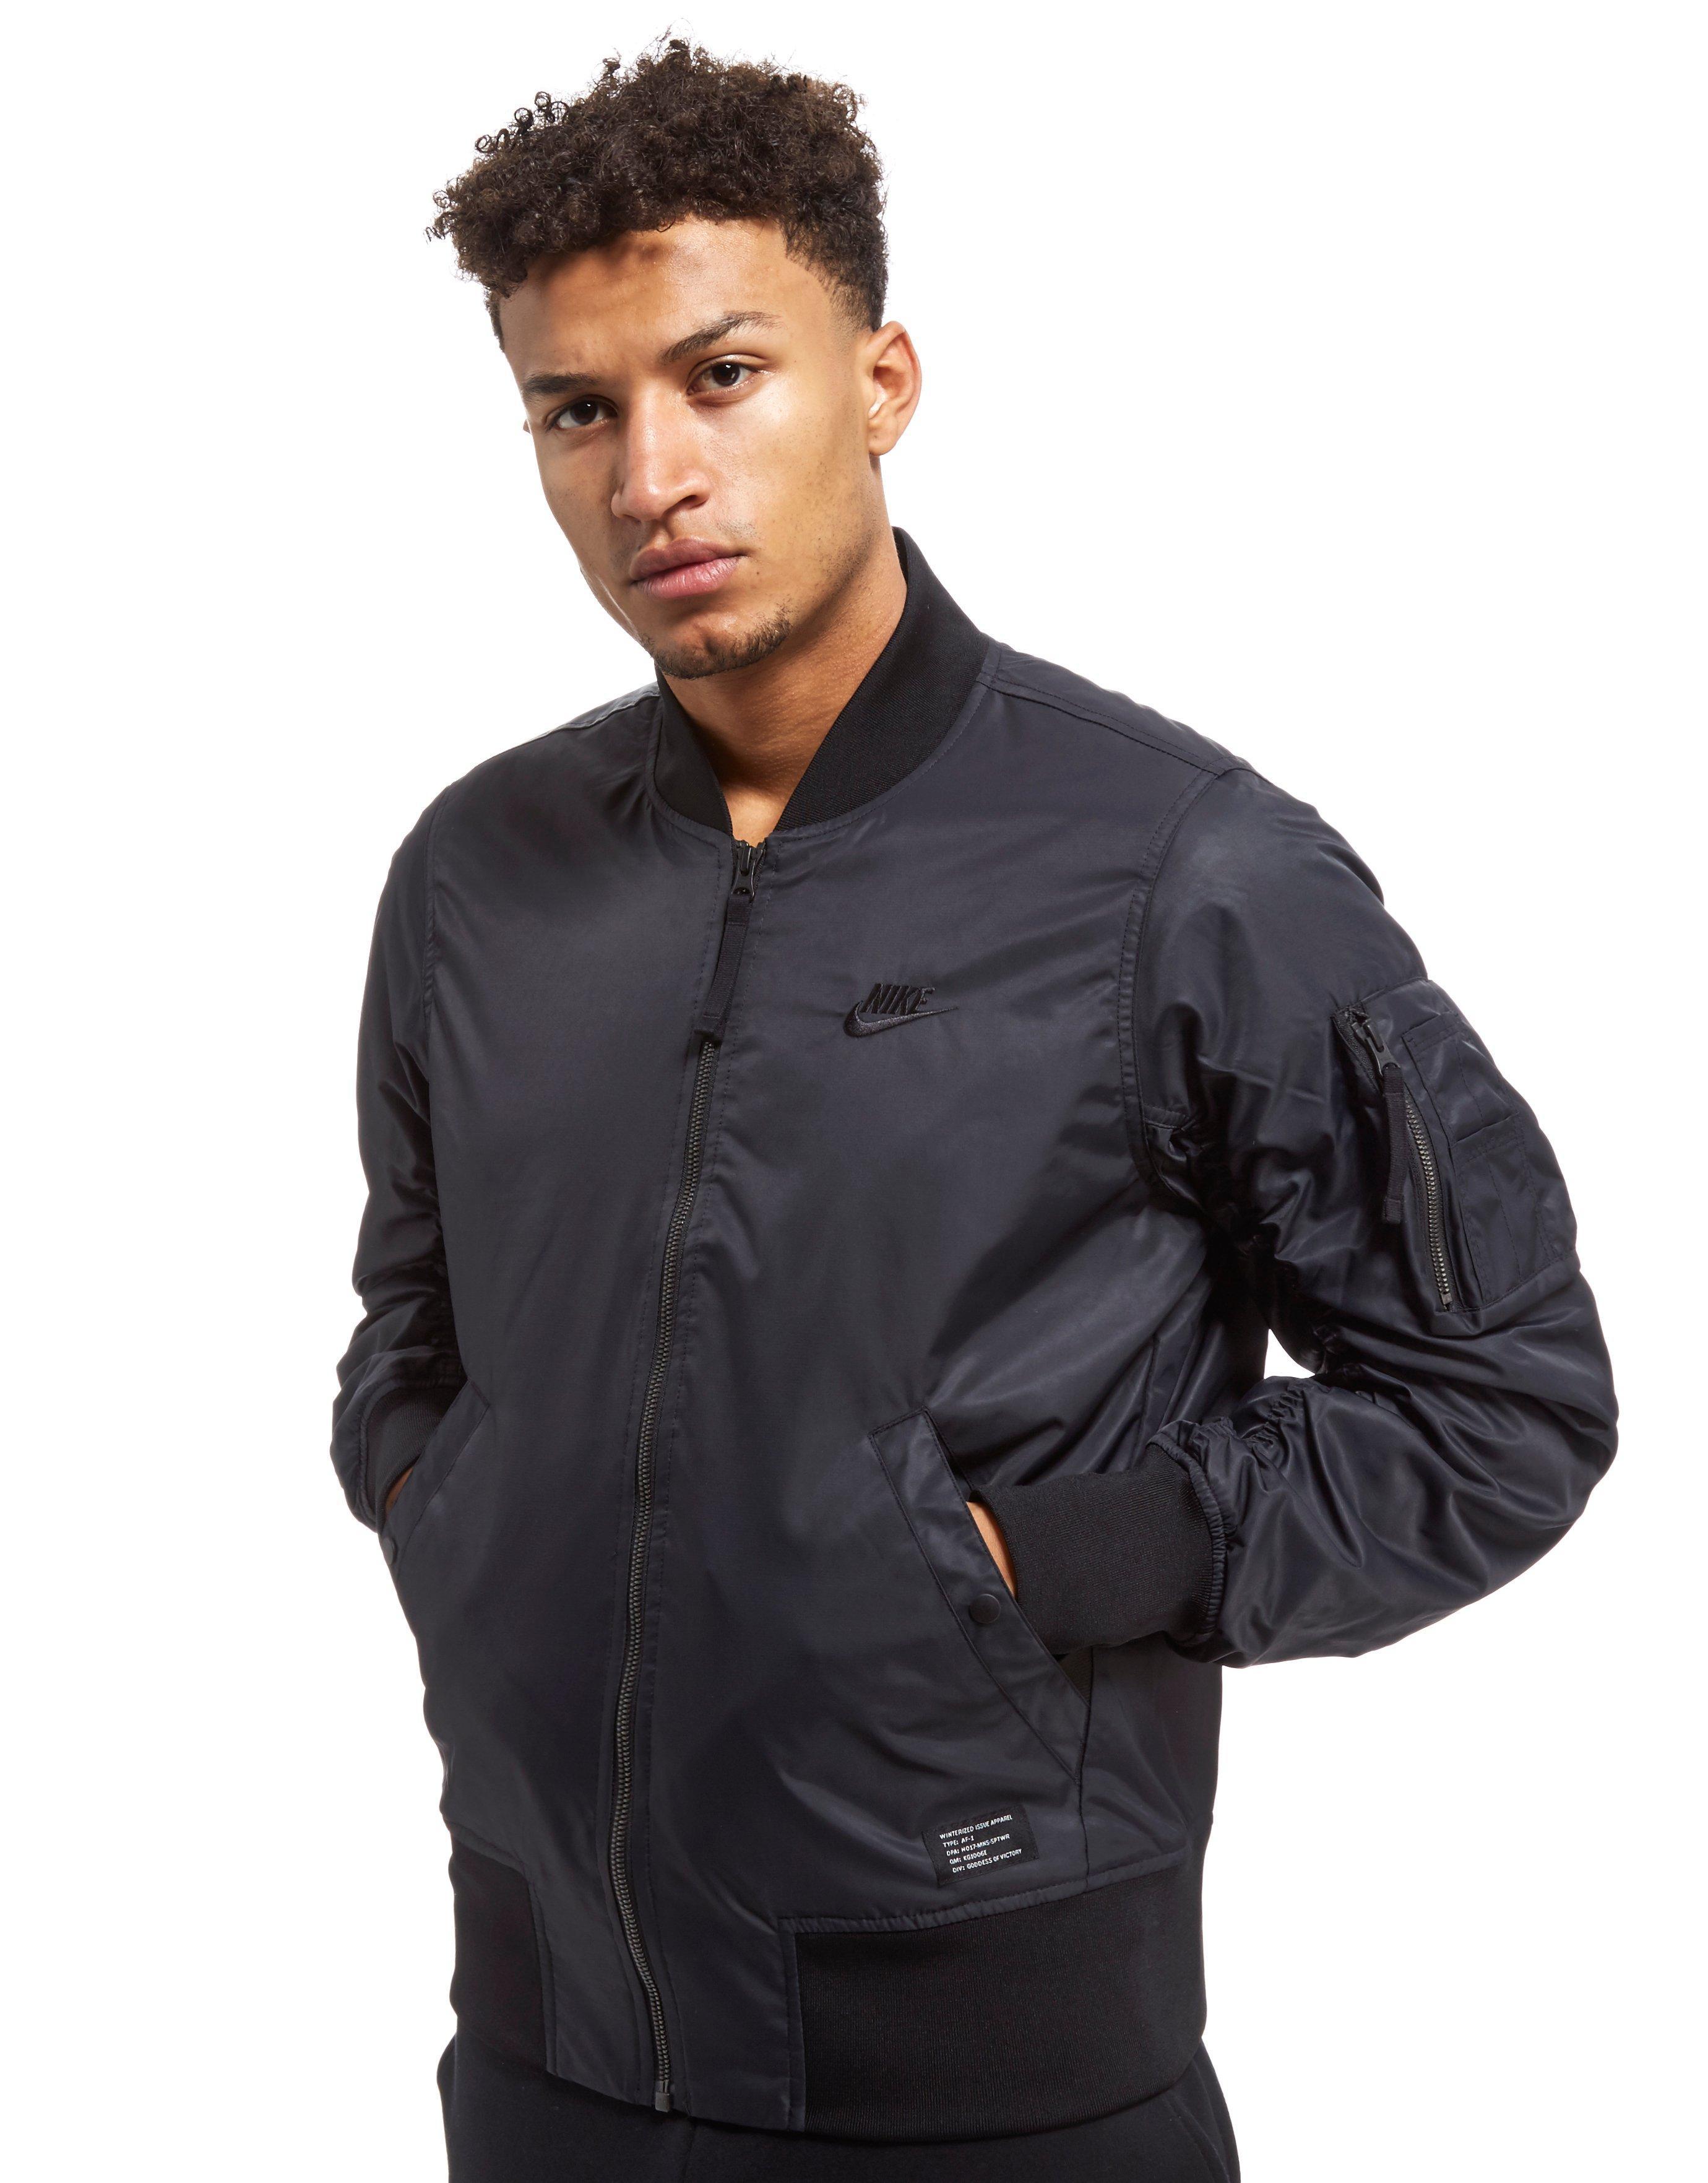 Nike Synthetic Air Force 1 Woven Jacket in Black for Men - Lyst